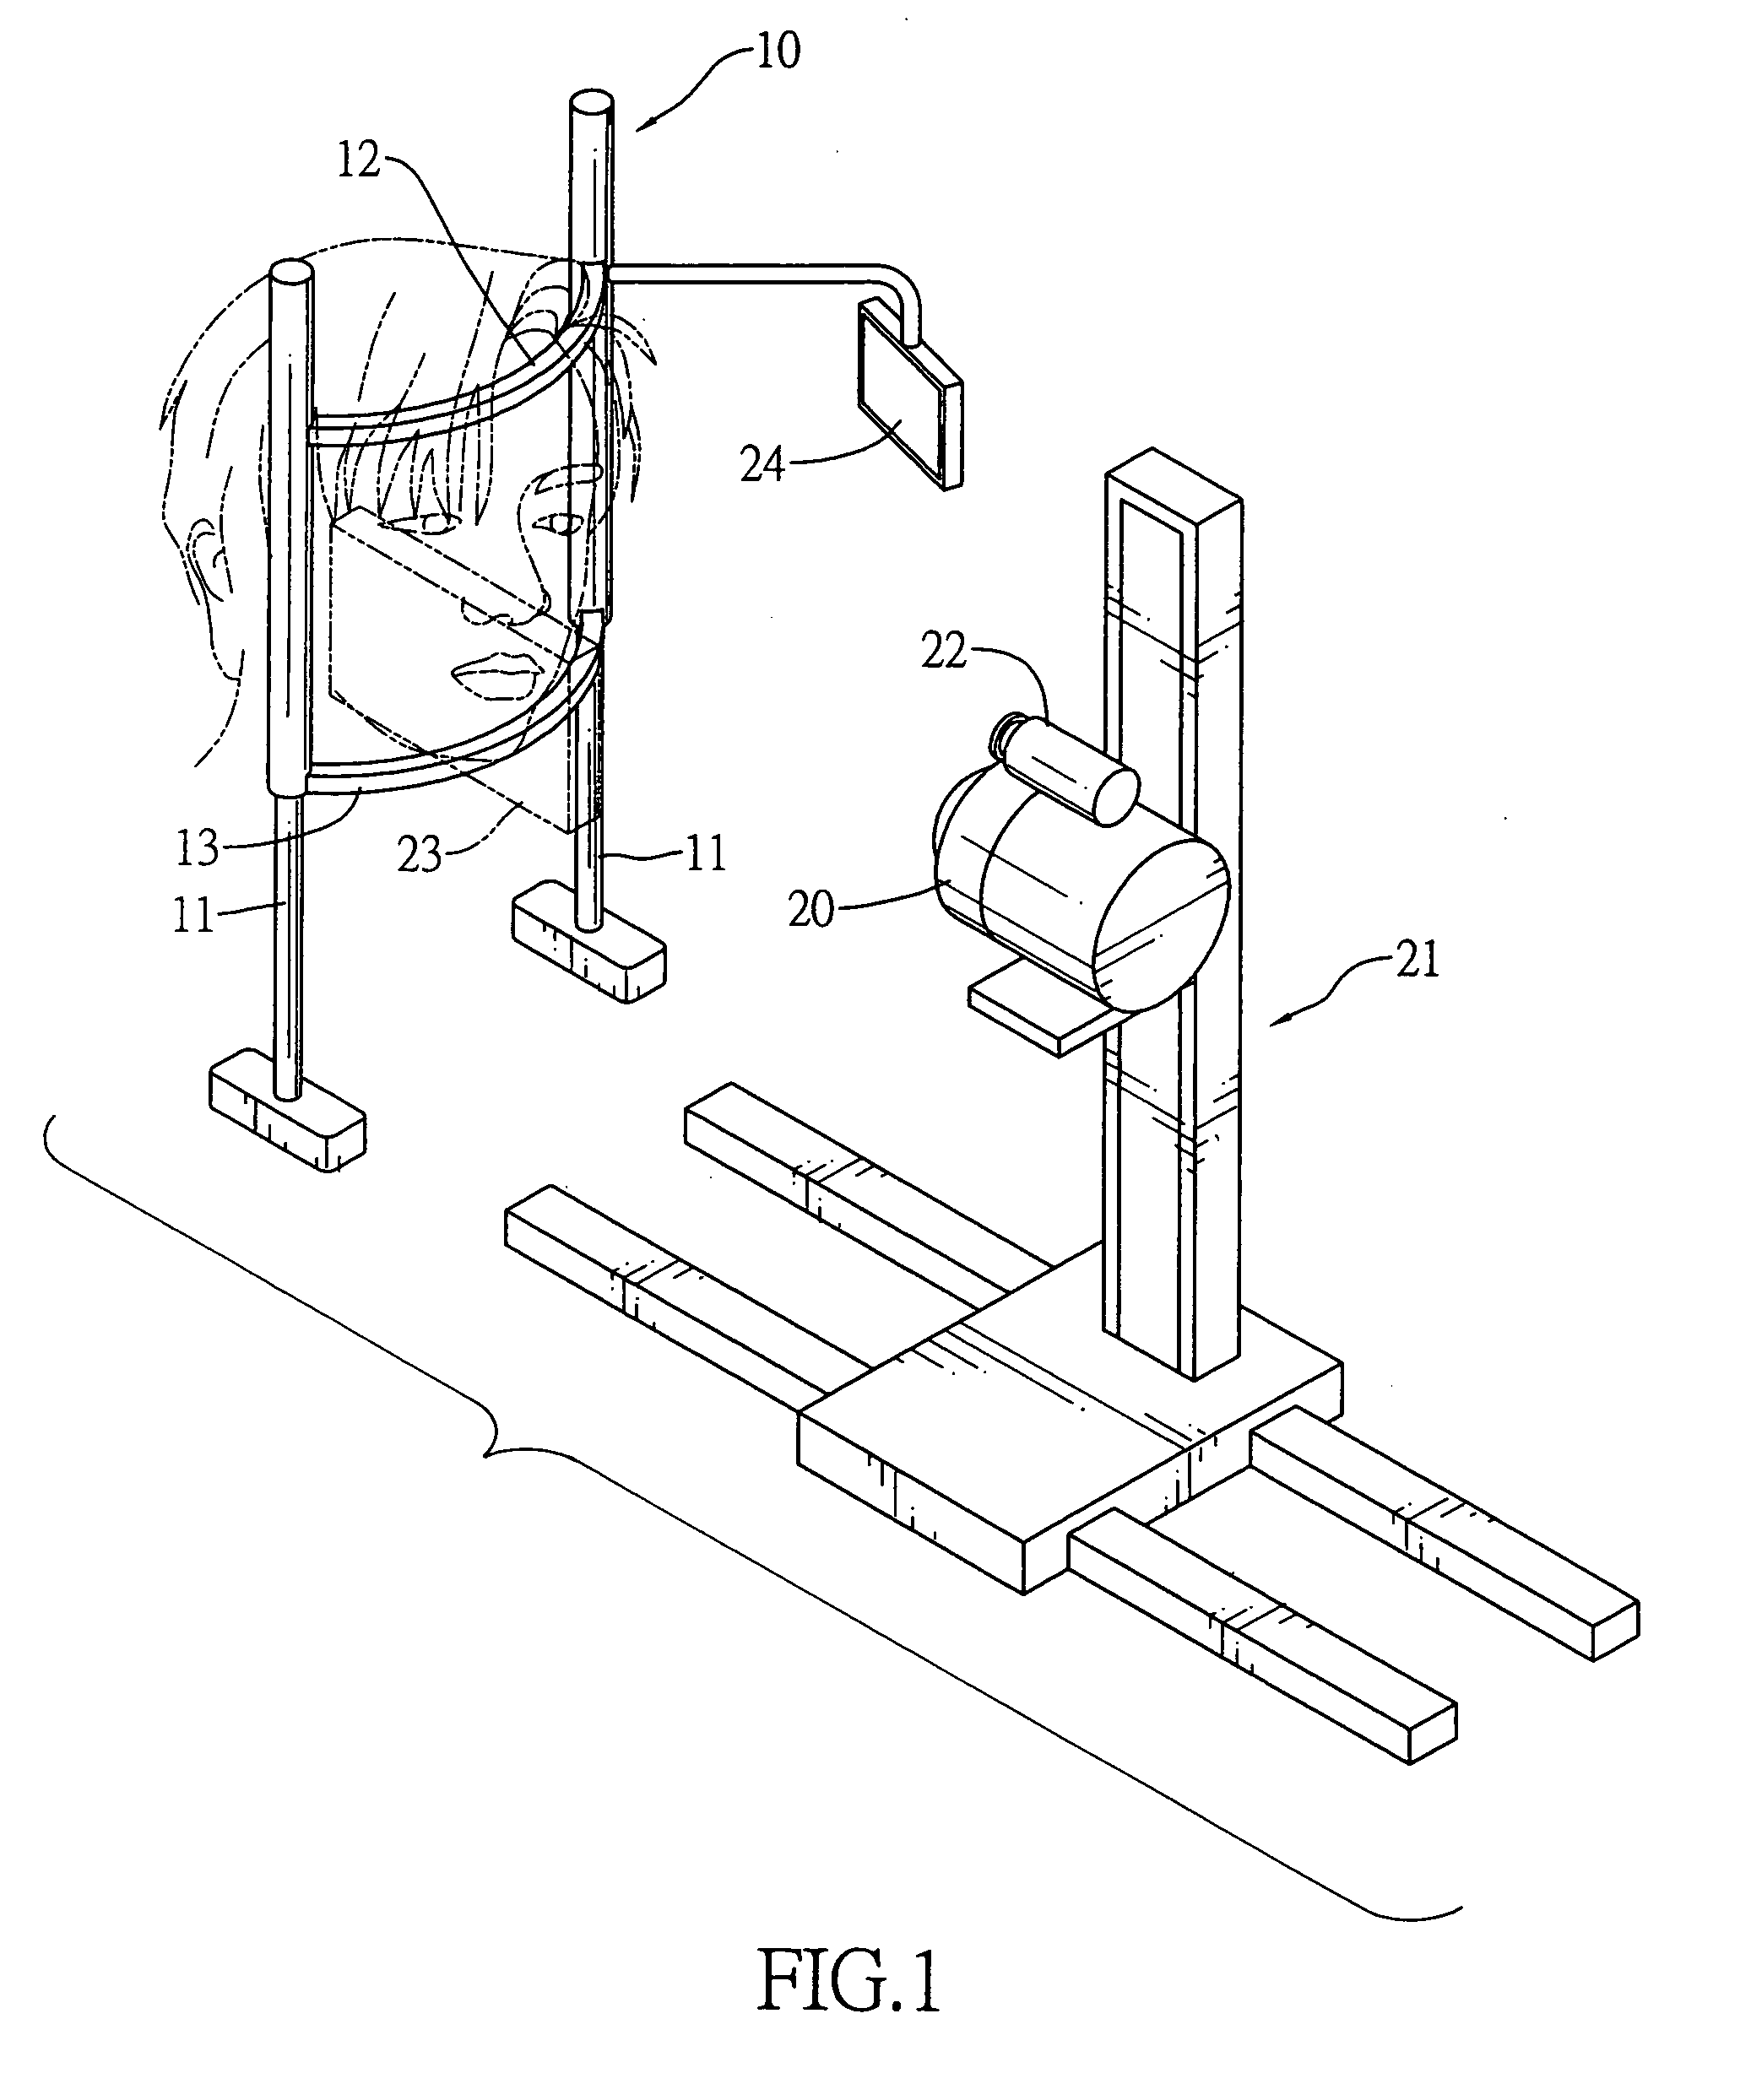 Method of using infrared thermal imager to diagnose eye diseases and the device thereof